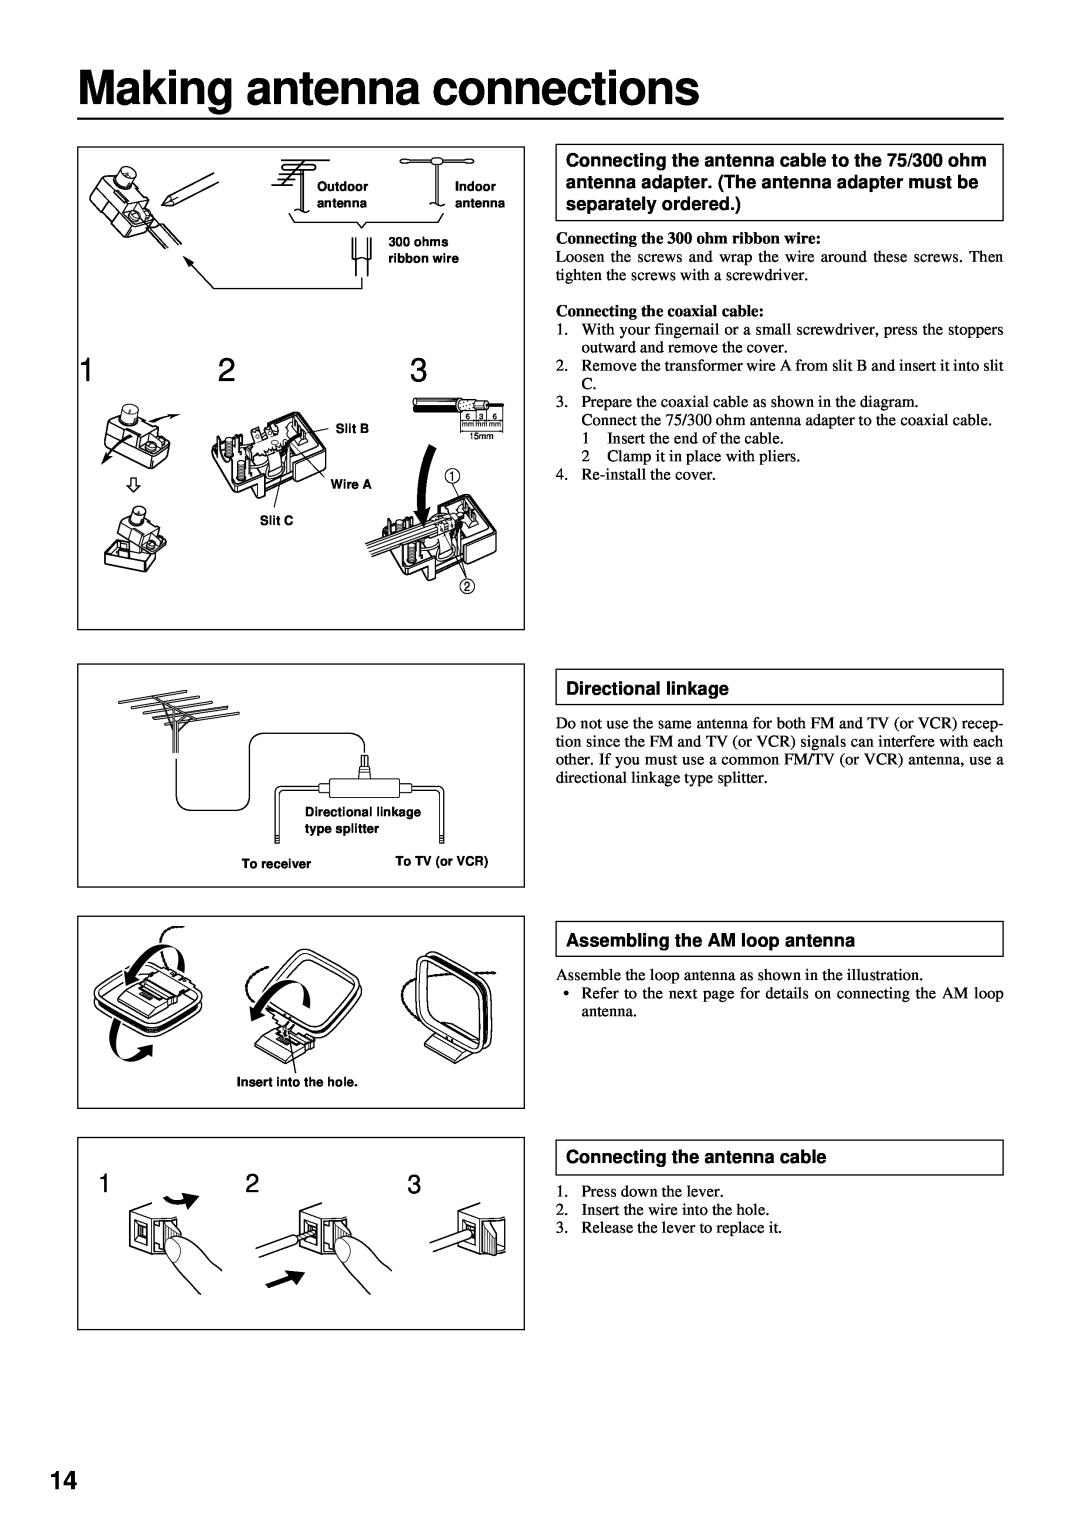 Integra DTR-7 instruction manual Making antenna connections, Directional Iinkage, Assembling the AM loop antenna 